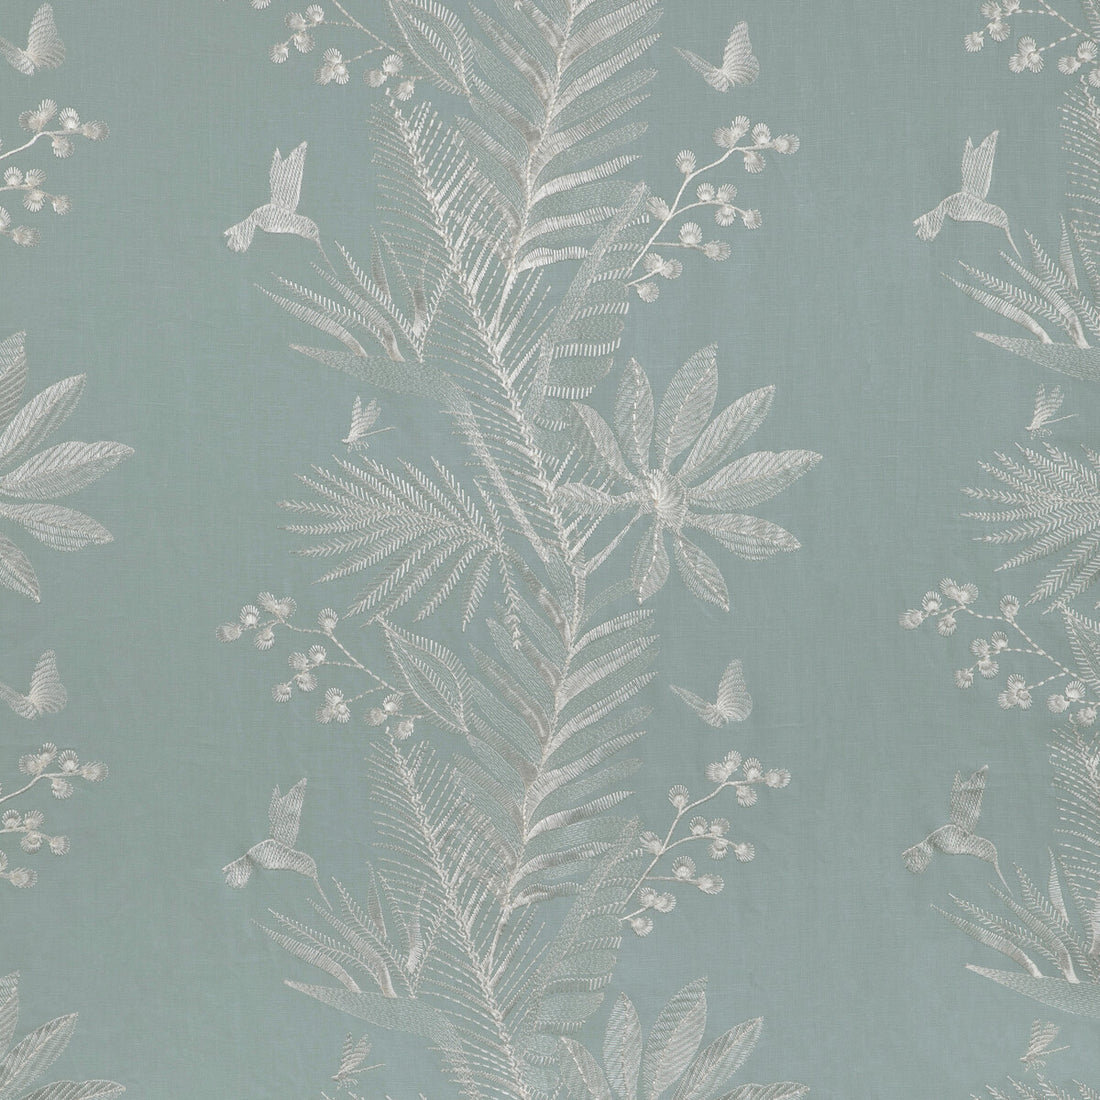 Manda Emb fabric in sky color - pattern 8023114.51.0 - by Brunschwig &amp; Fils in the Anduze Embroideries collection